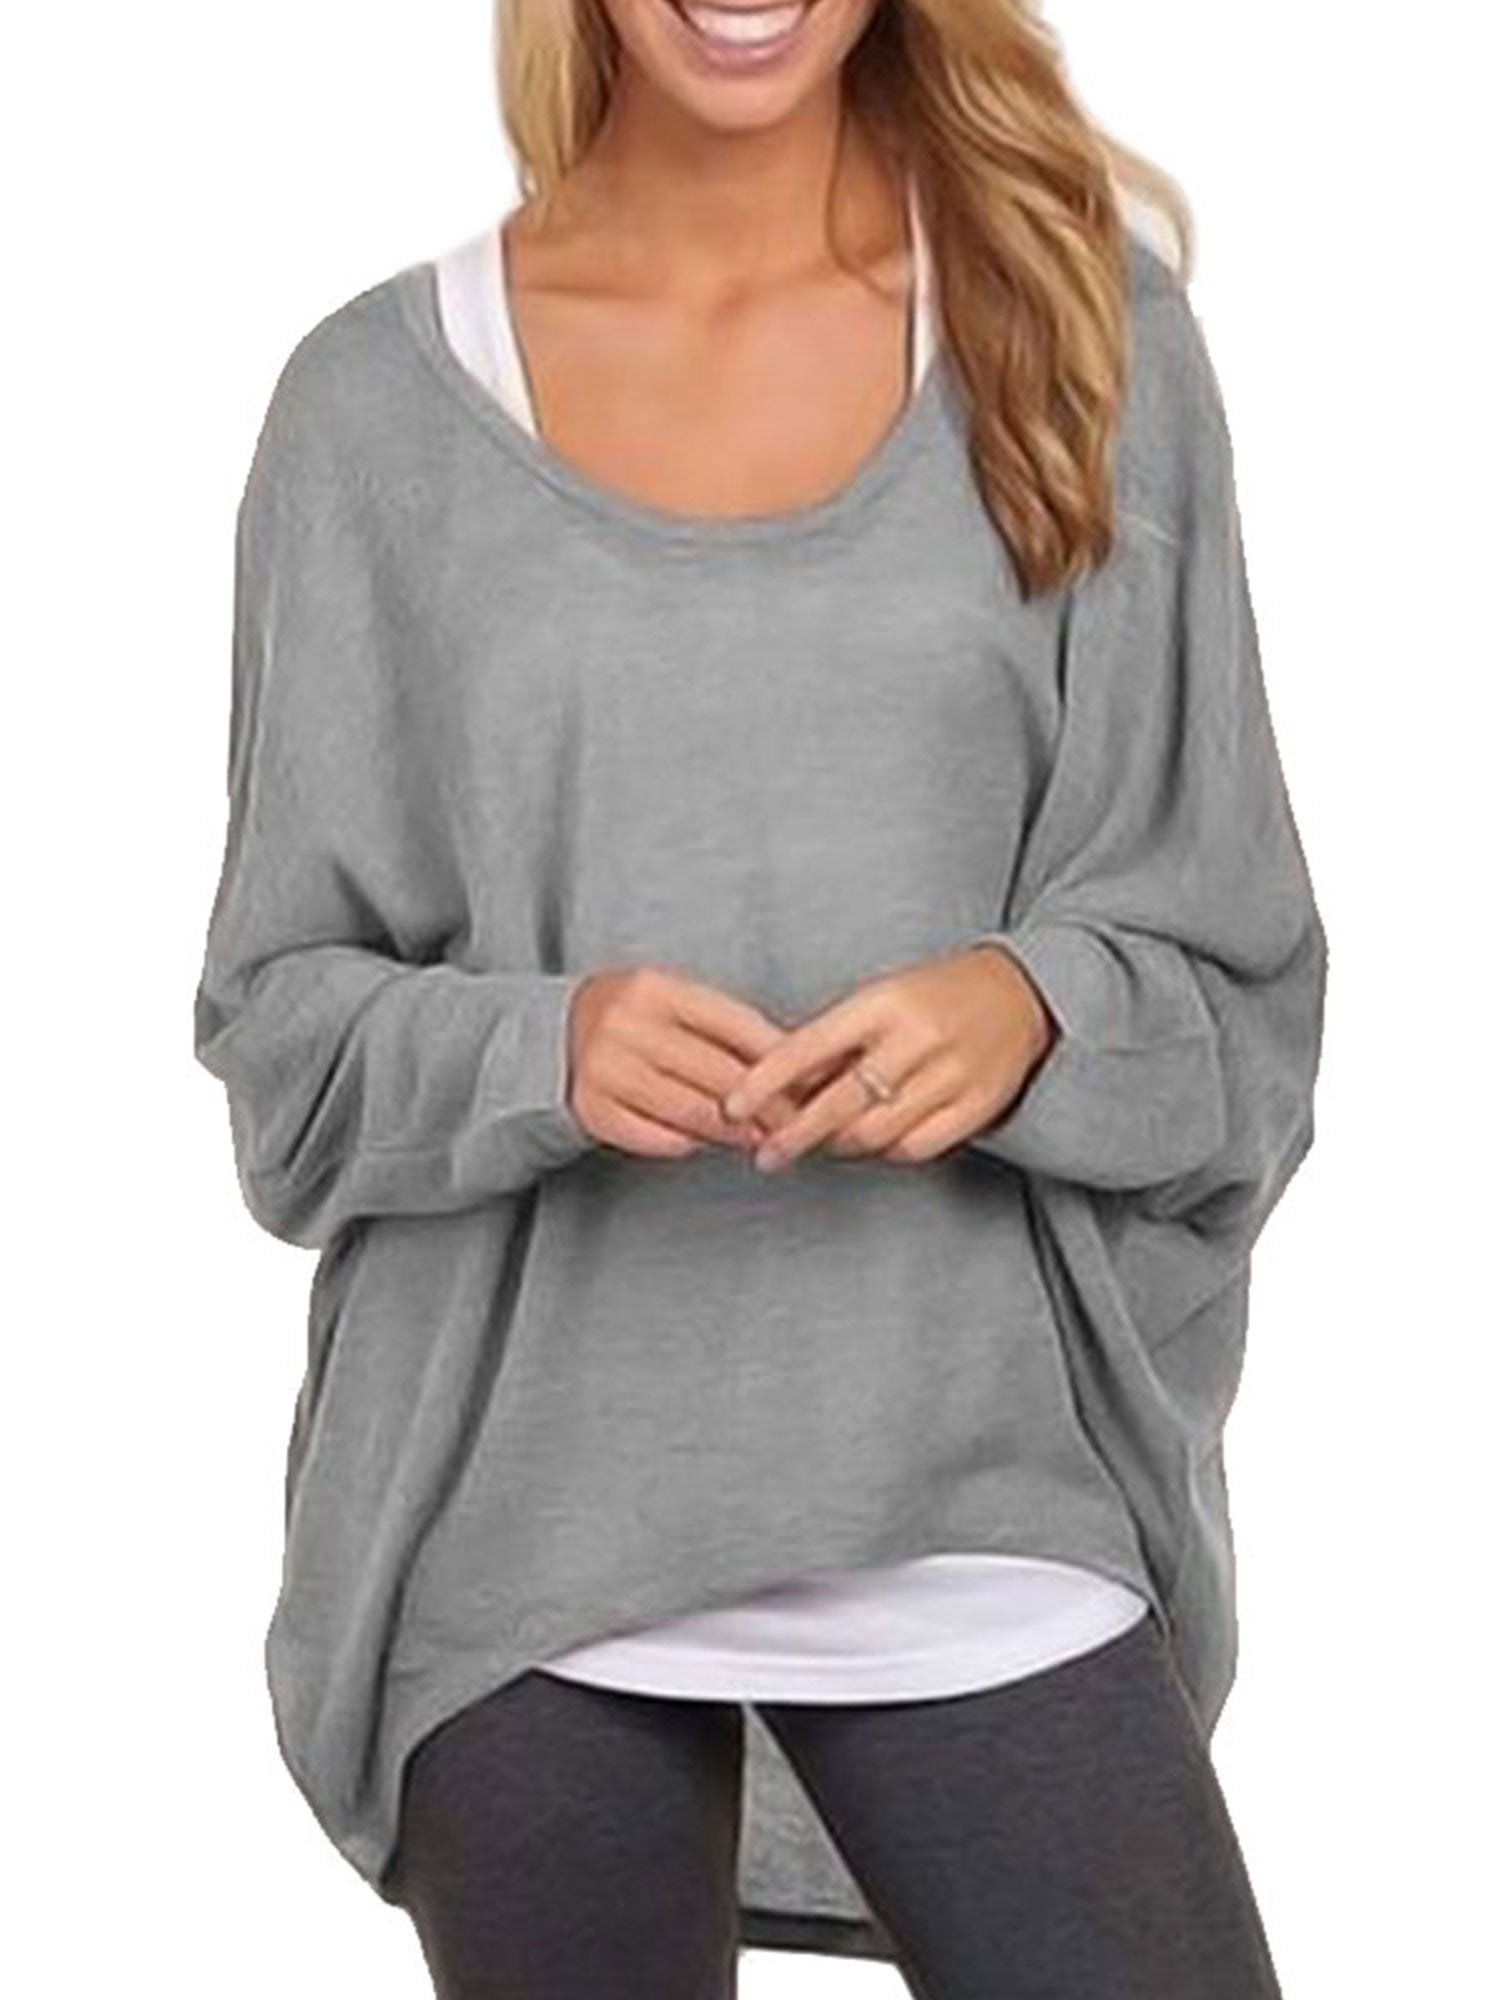 CANIKAT Womens Crewneck Long Sleeve Knot Twist Front Sweatshirt Casual Loose Pullovers Tops